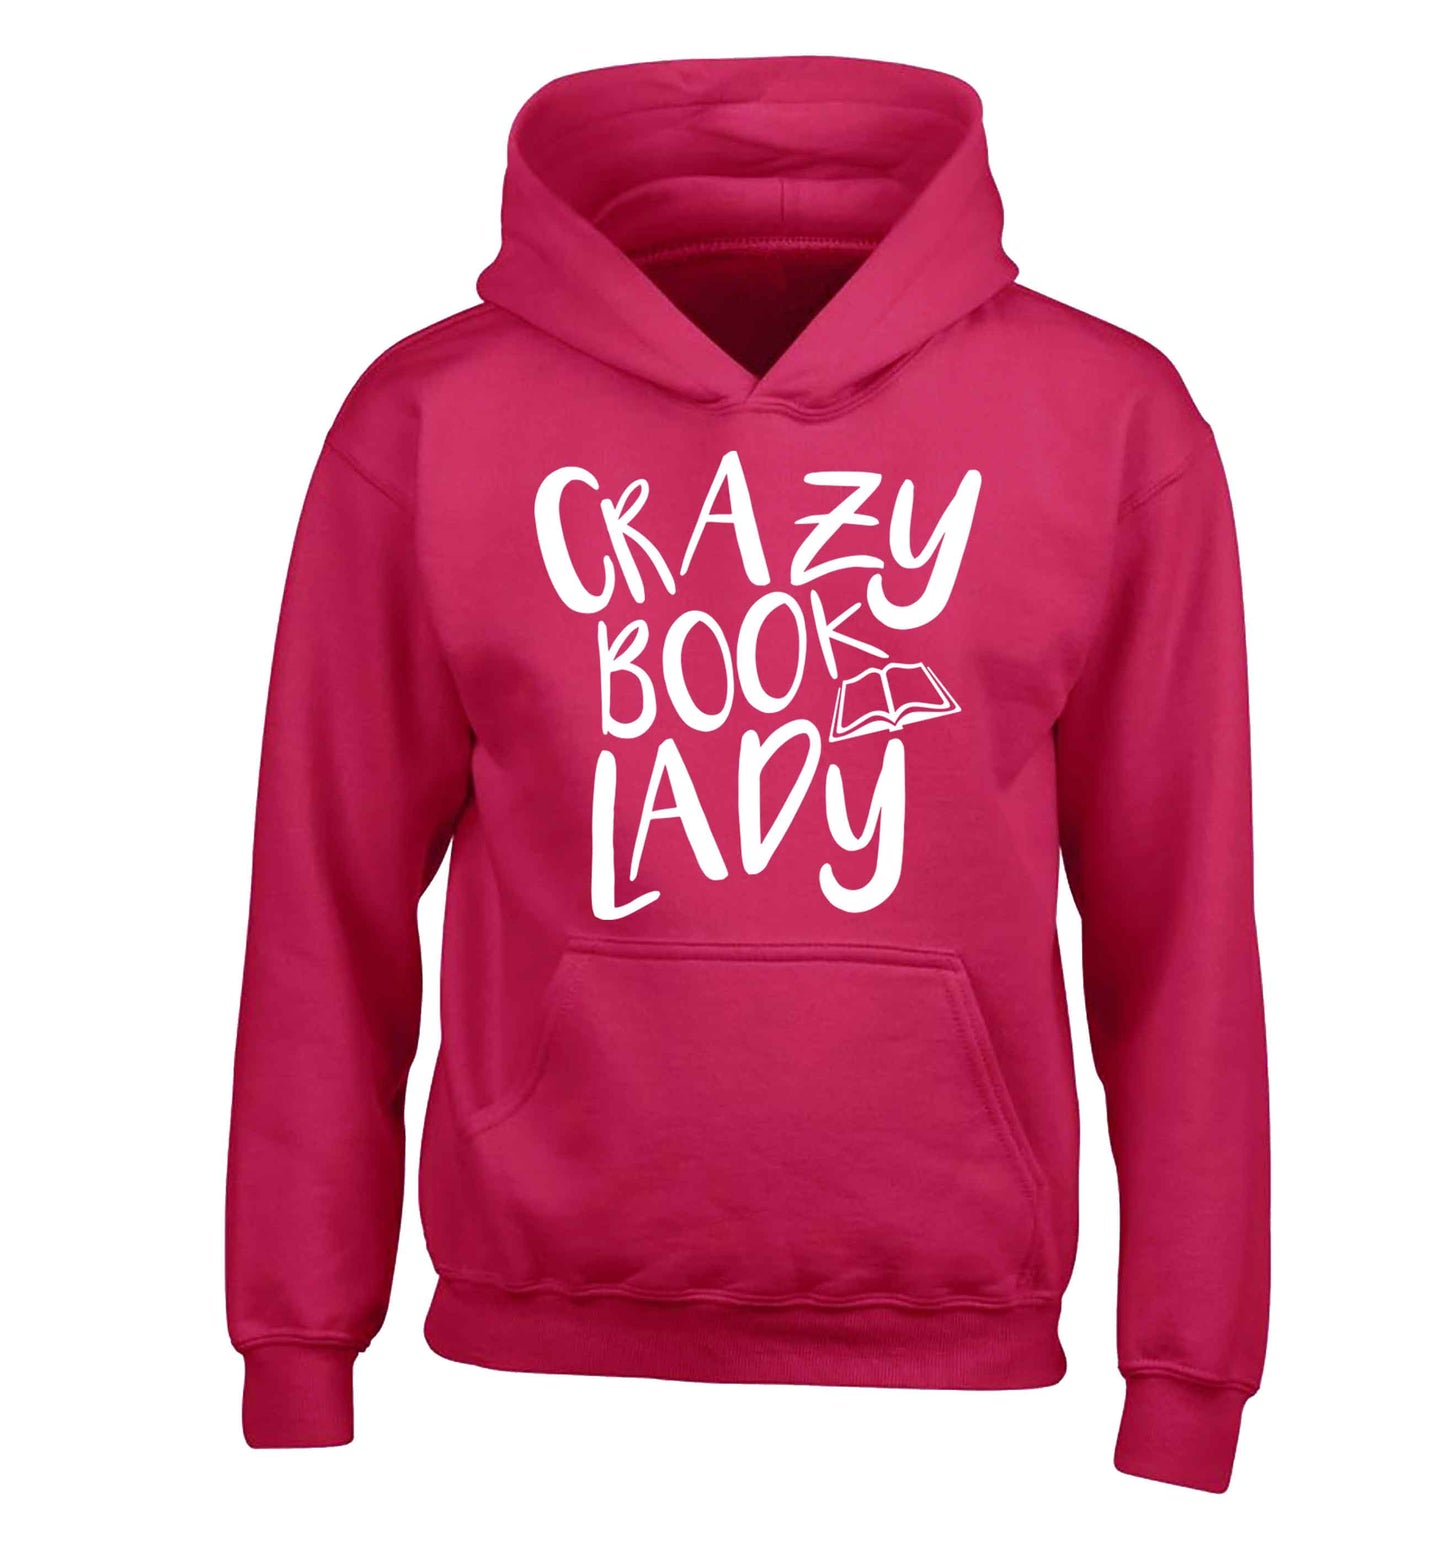 Crazy book lady children's pink hoodie 12-13 Years